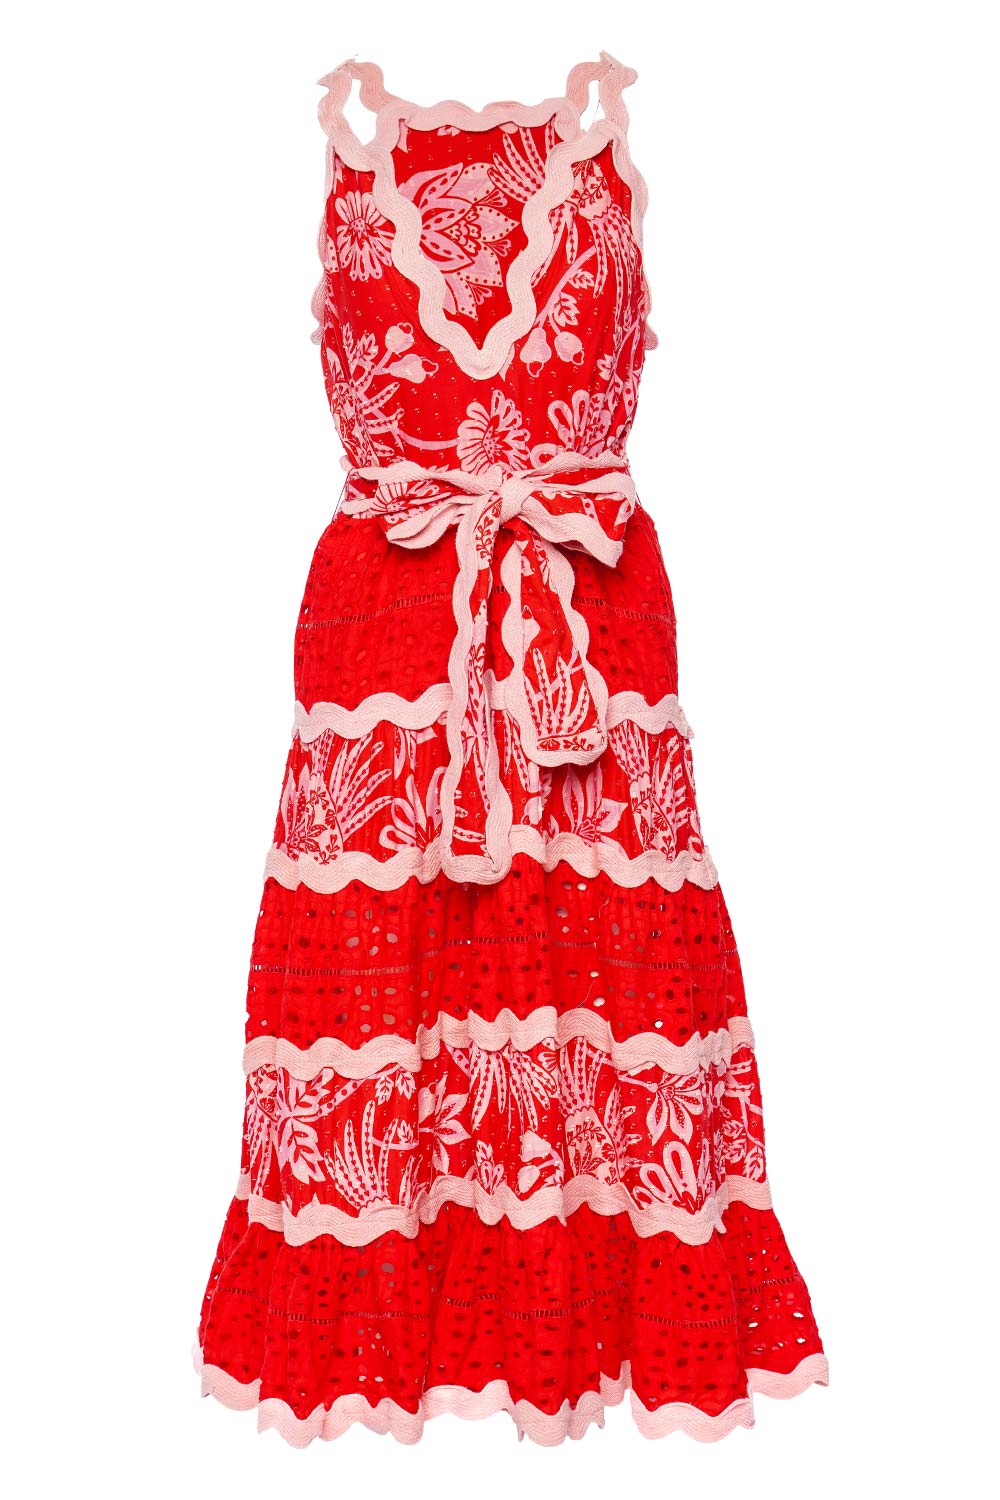 FARM Rio Flowerful Red Scallop Belted Midi Dress